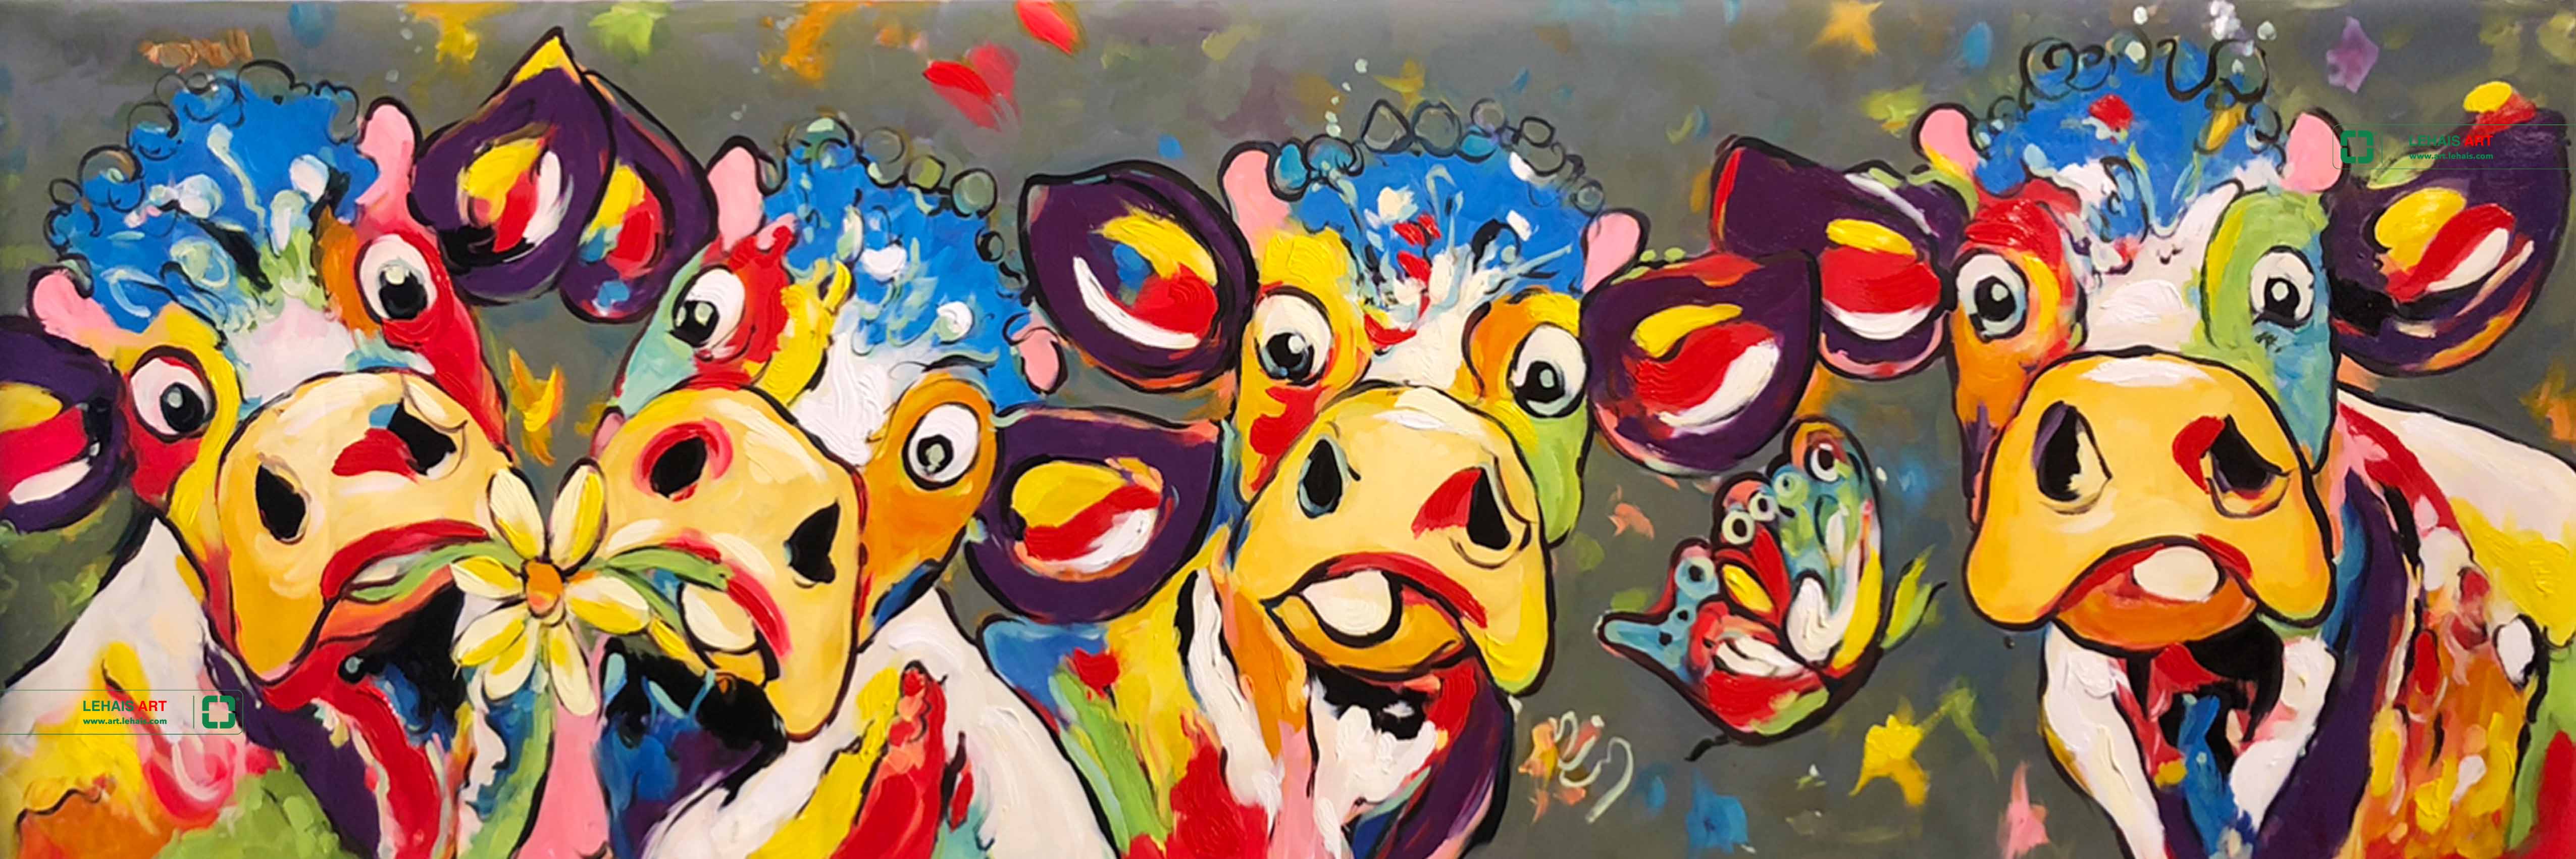 Oil painting of cows in modern style - TSD774LHAR